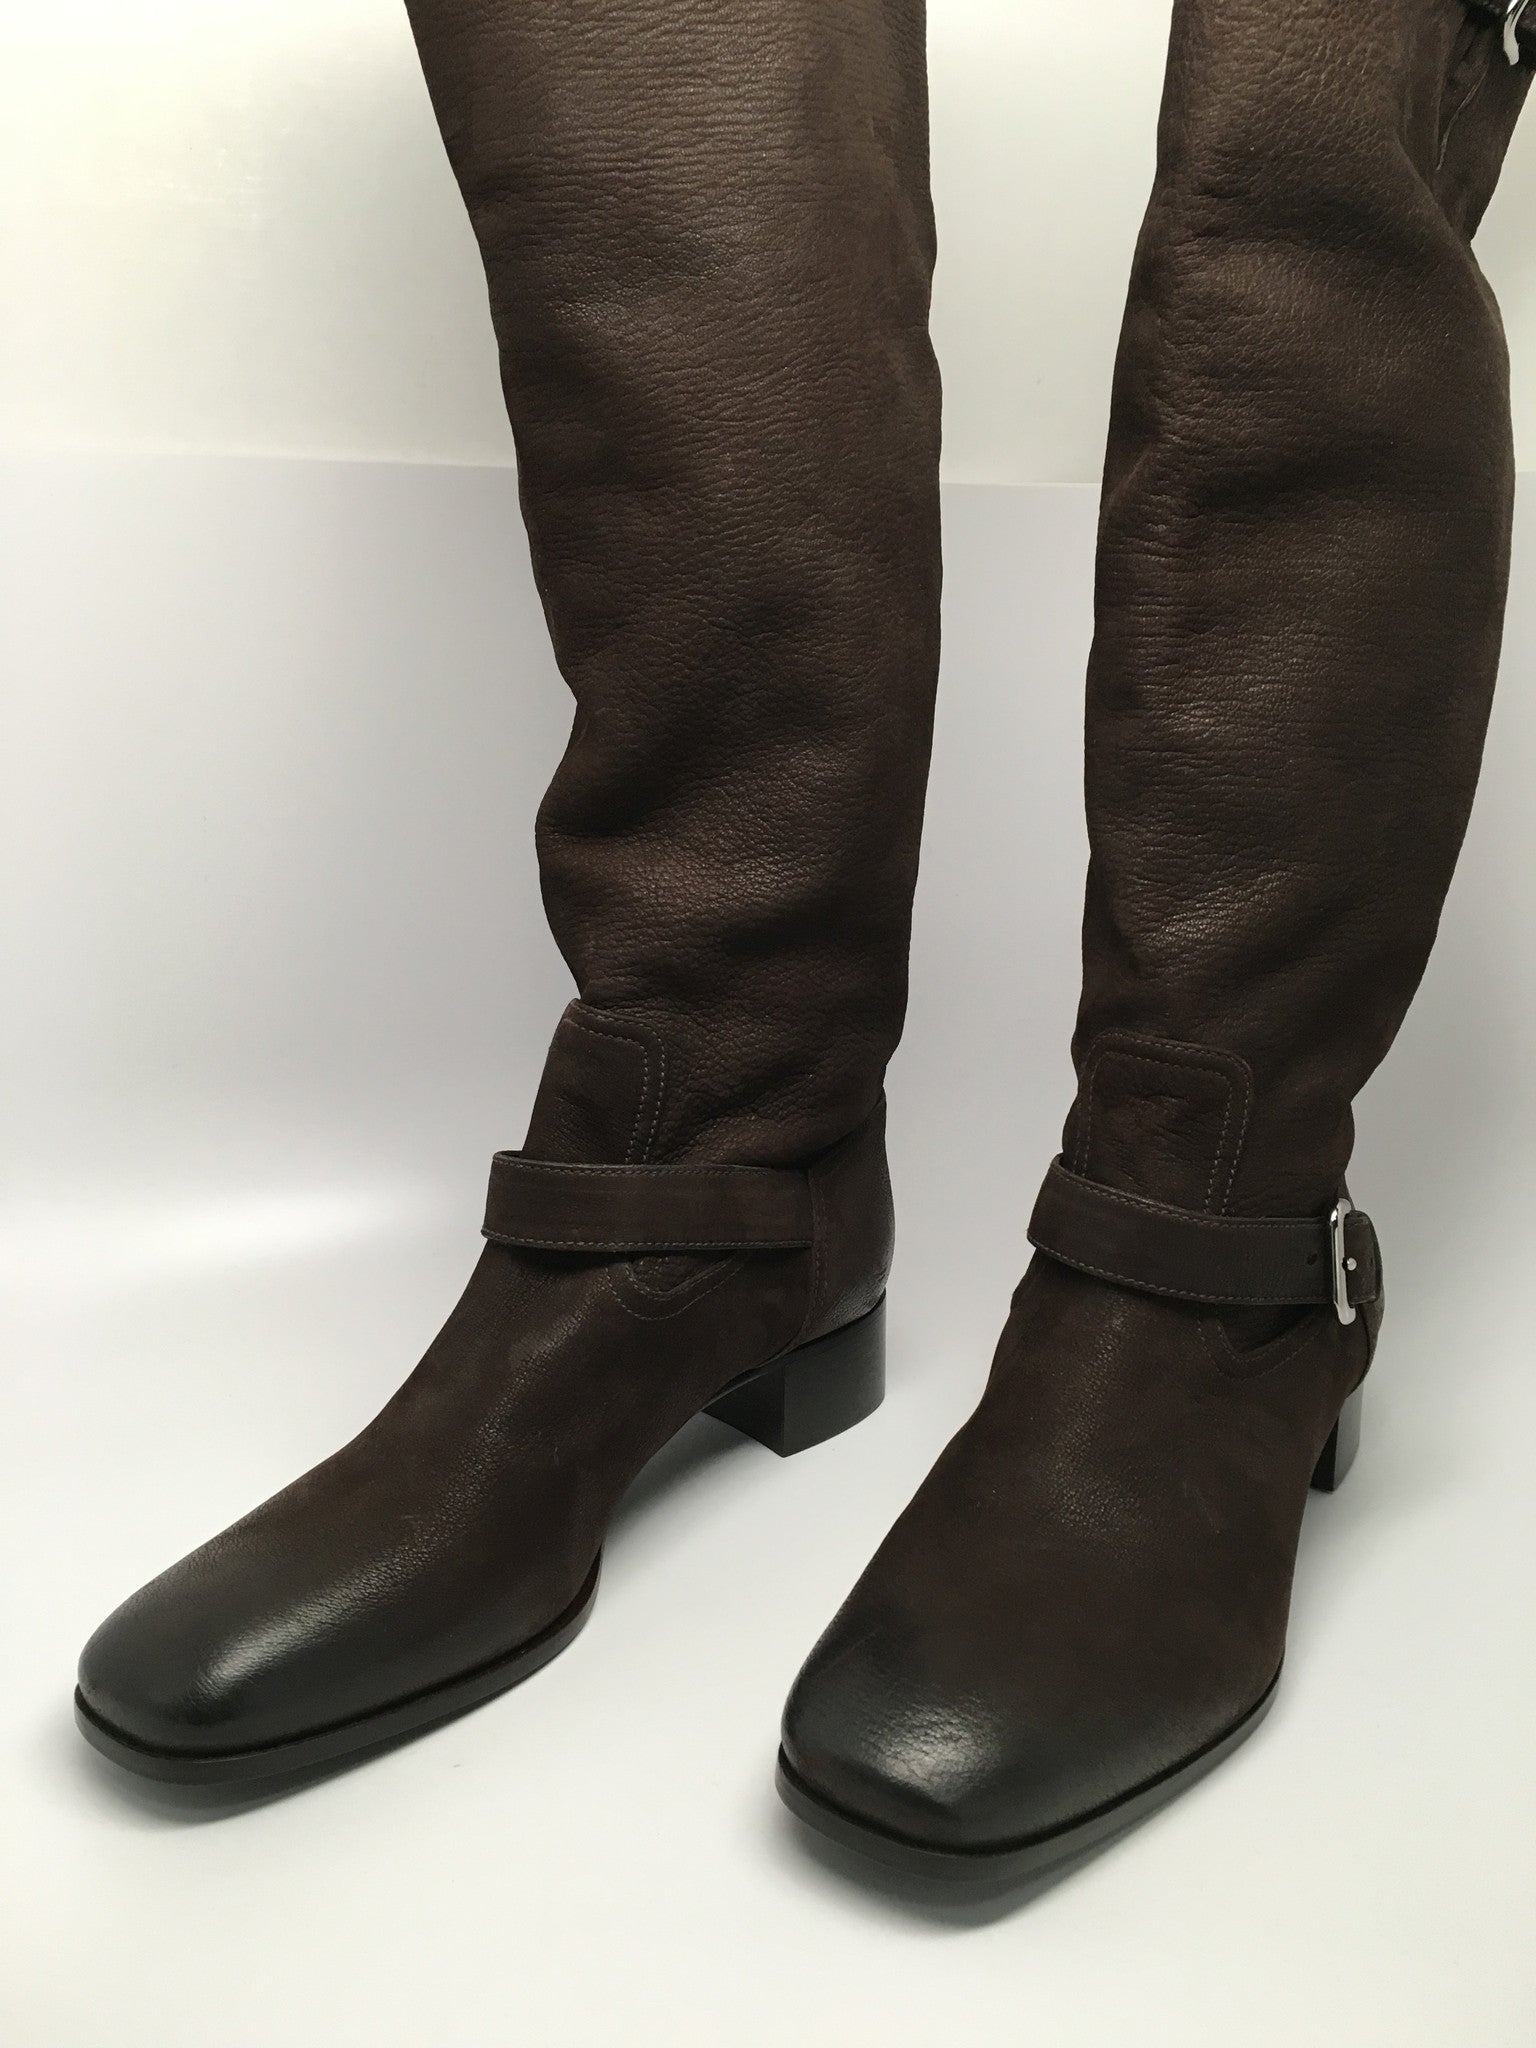 NEW PRADA CALZATURE DONNA CAPRA ANTIC 2 BROWN LEATHER BOOTS SIZE 39